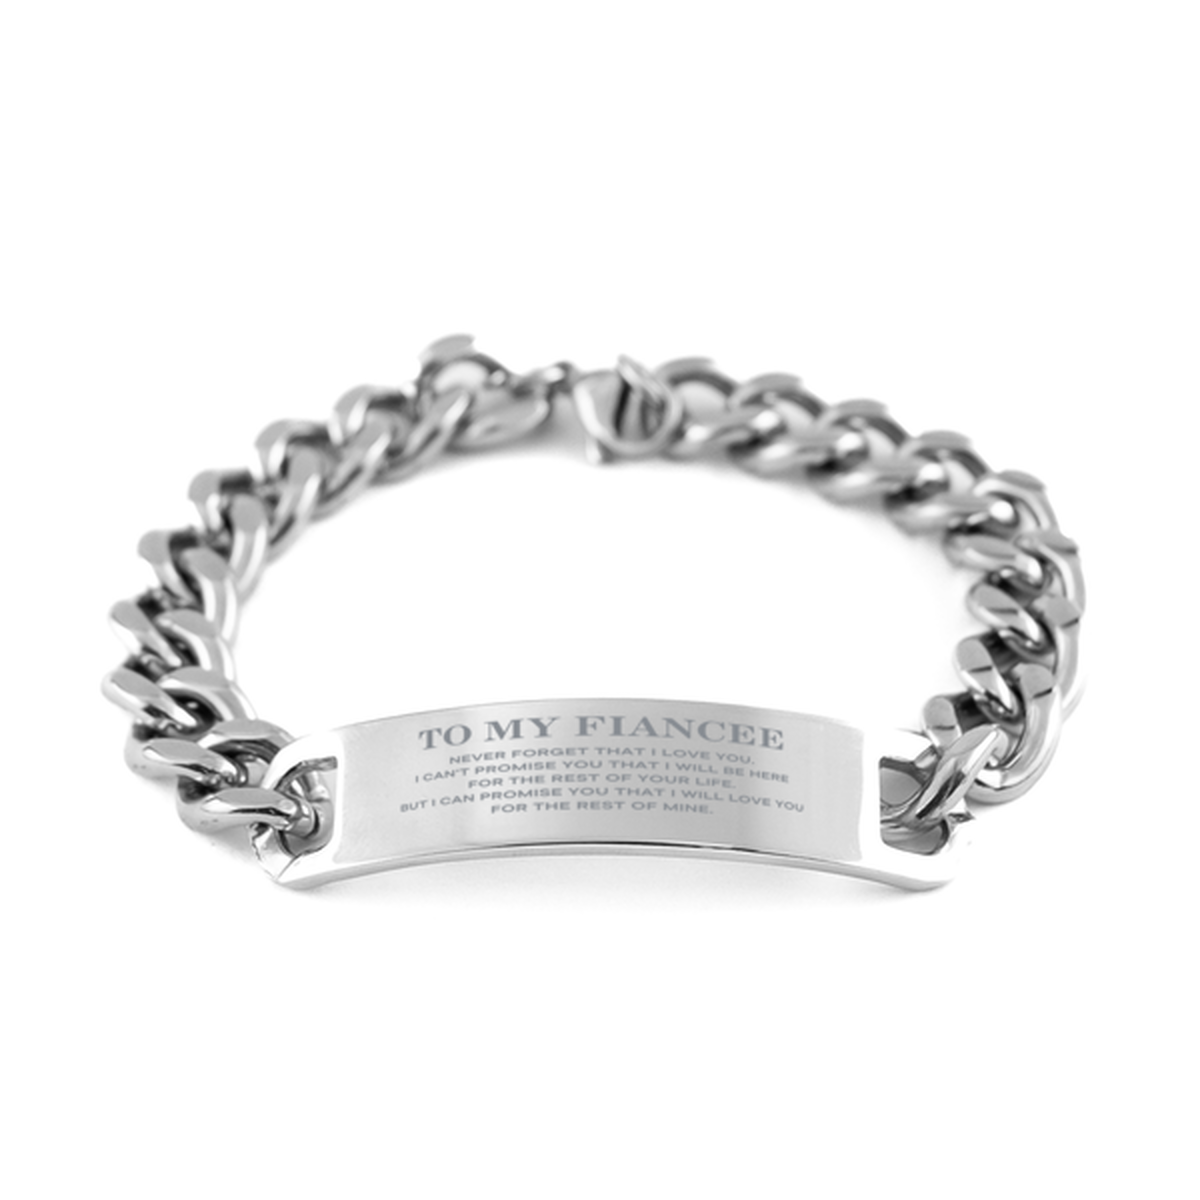 To My Fiancee Gifts, I will love you for the rest of mine, Love Fiancee Bracelet, Birthday Christmas Unique Cuban Chain Stainless Steel Bracelet For Fiancee